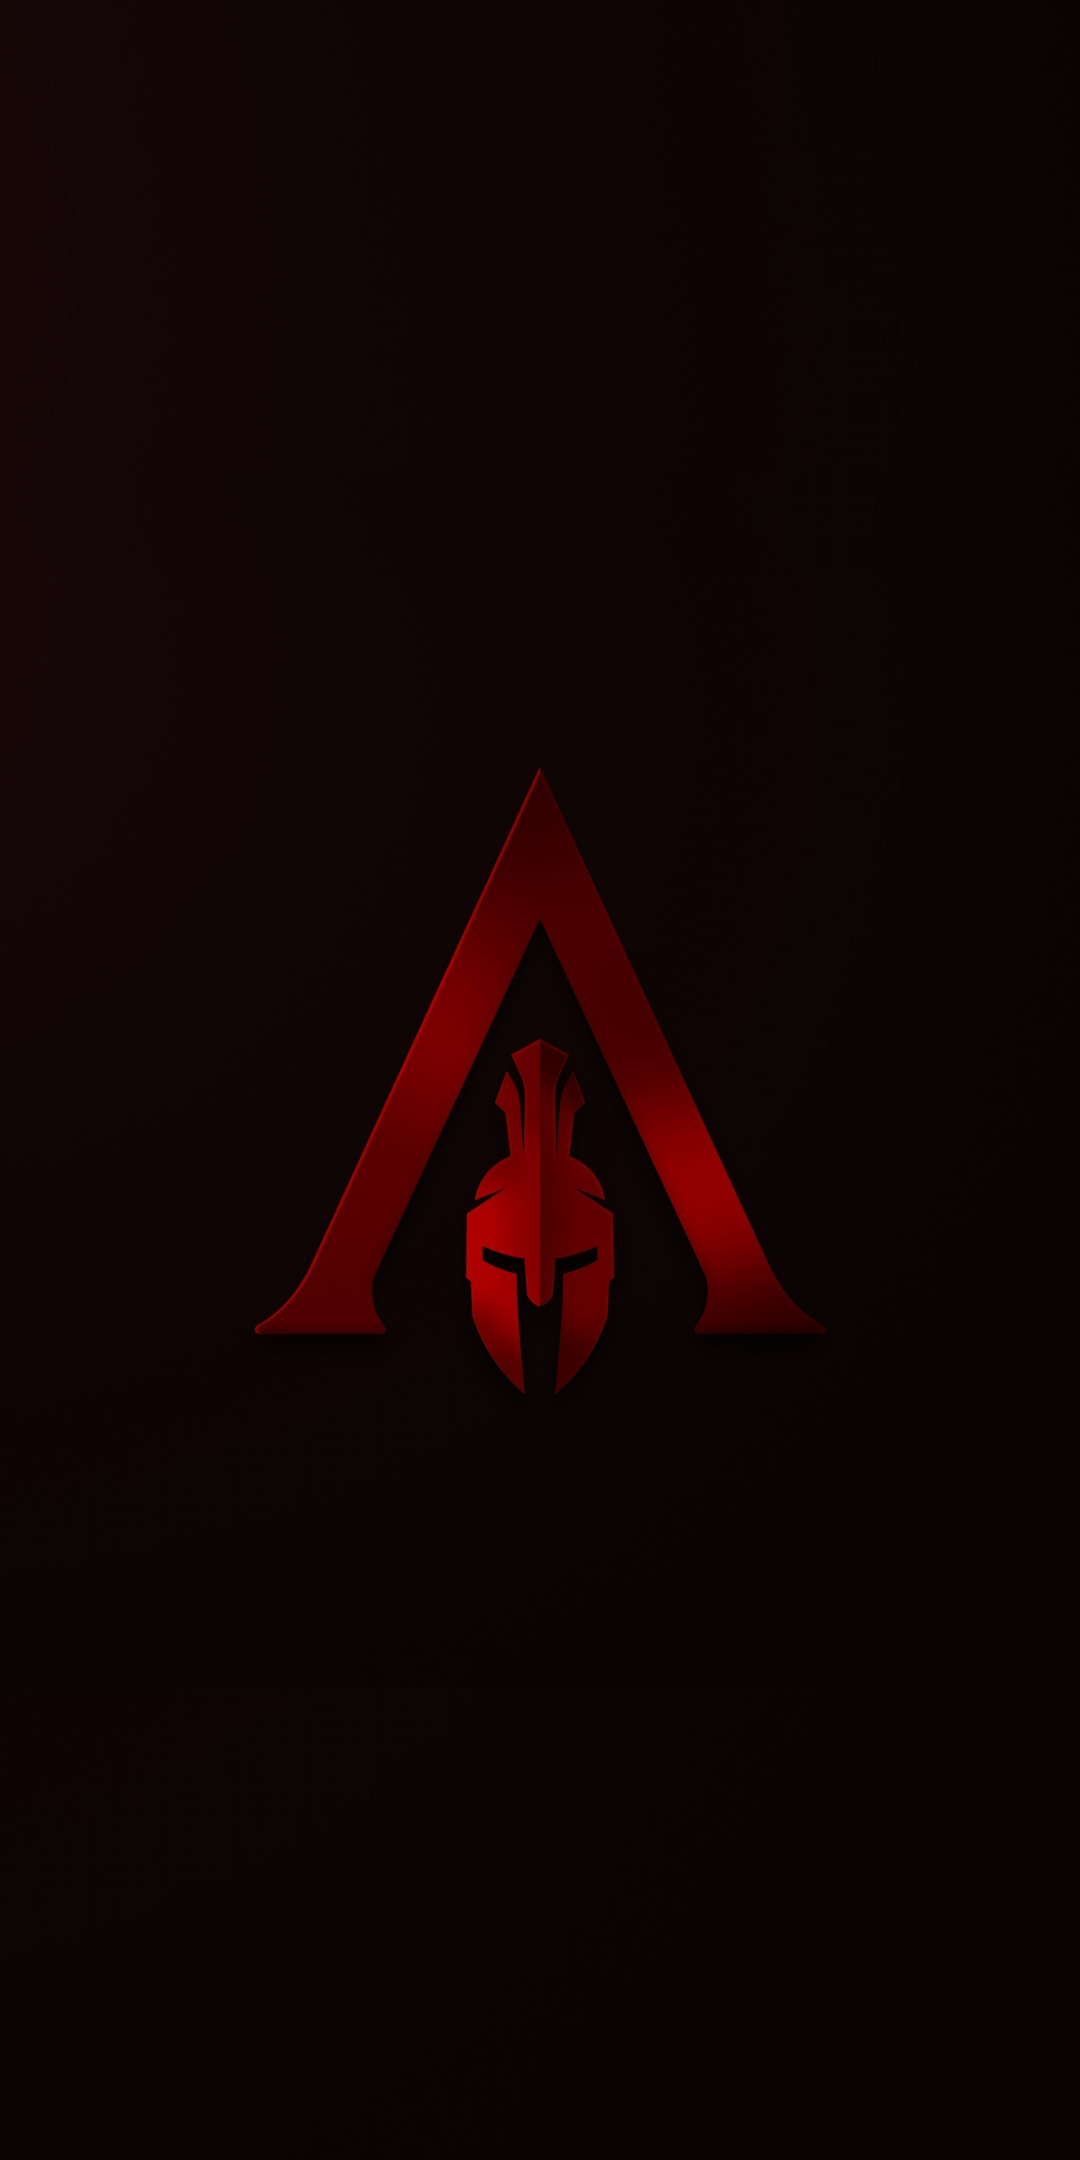 Download wallpaper x helmet minimal assassins creed odyssey honor x honor lite honor view x hd background